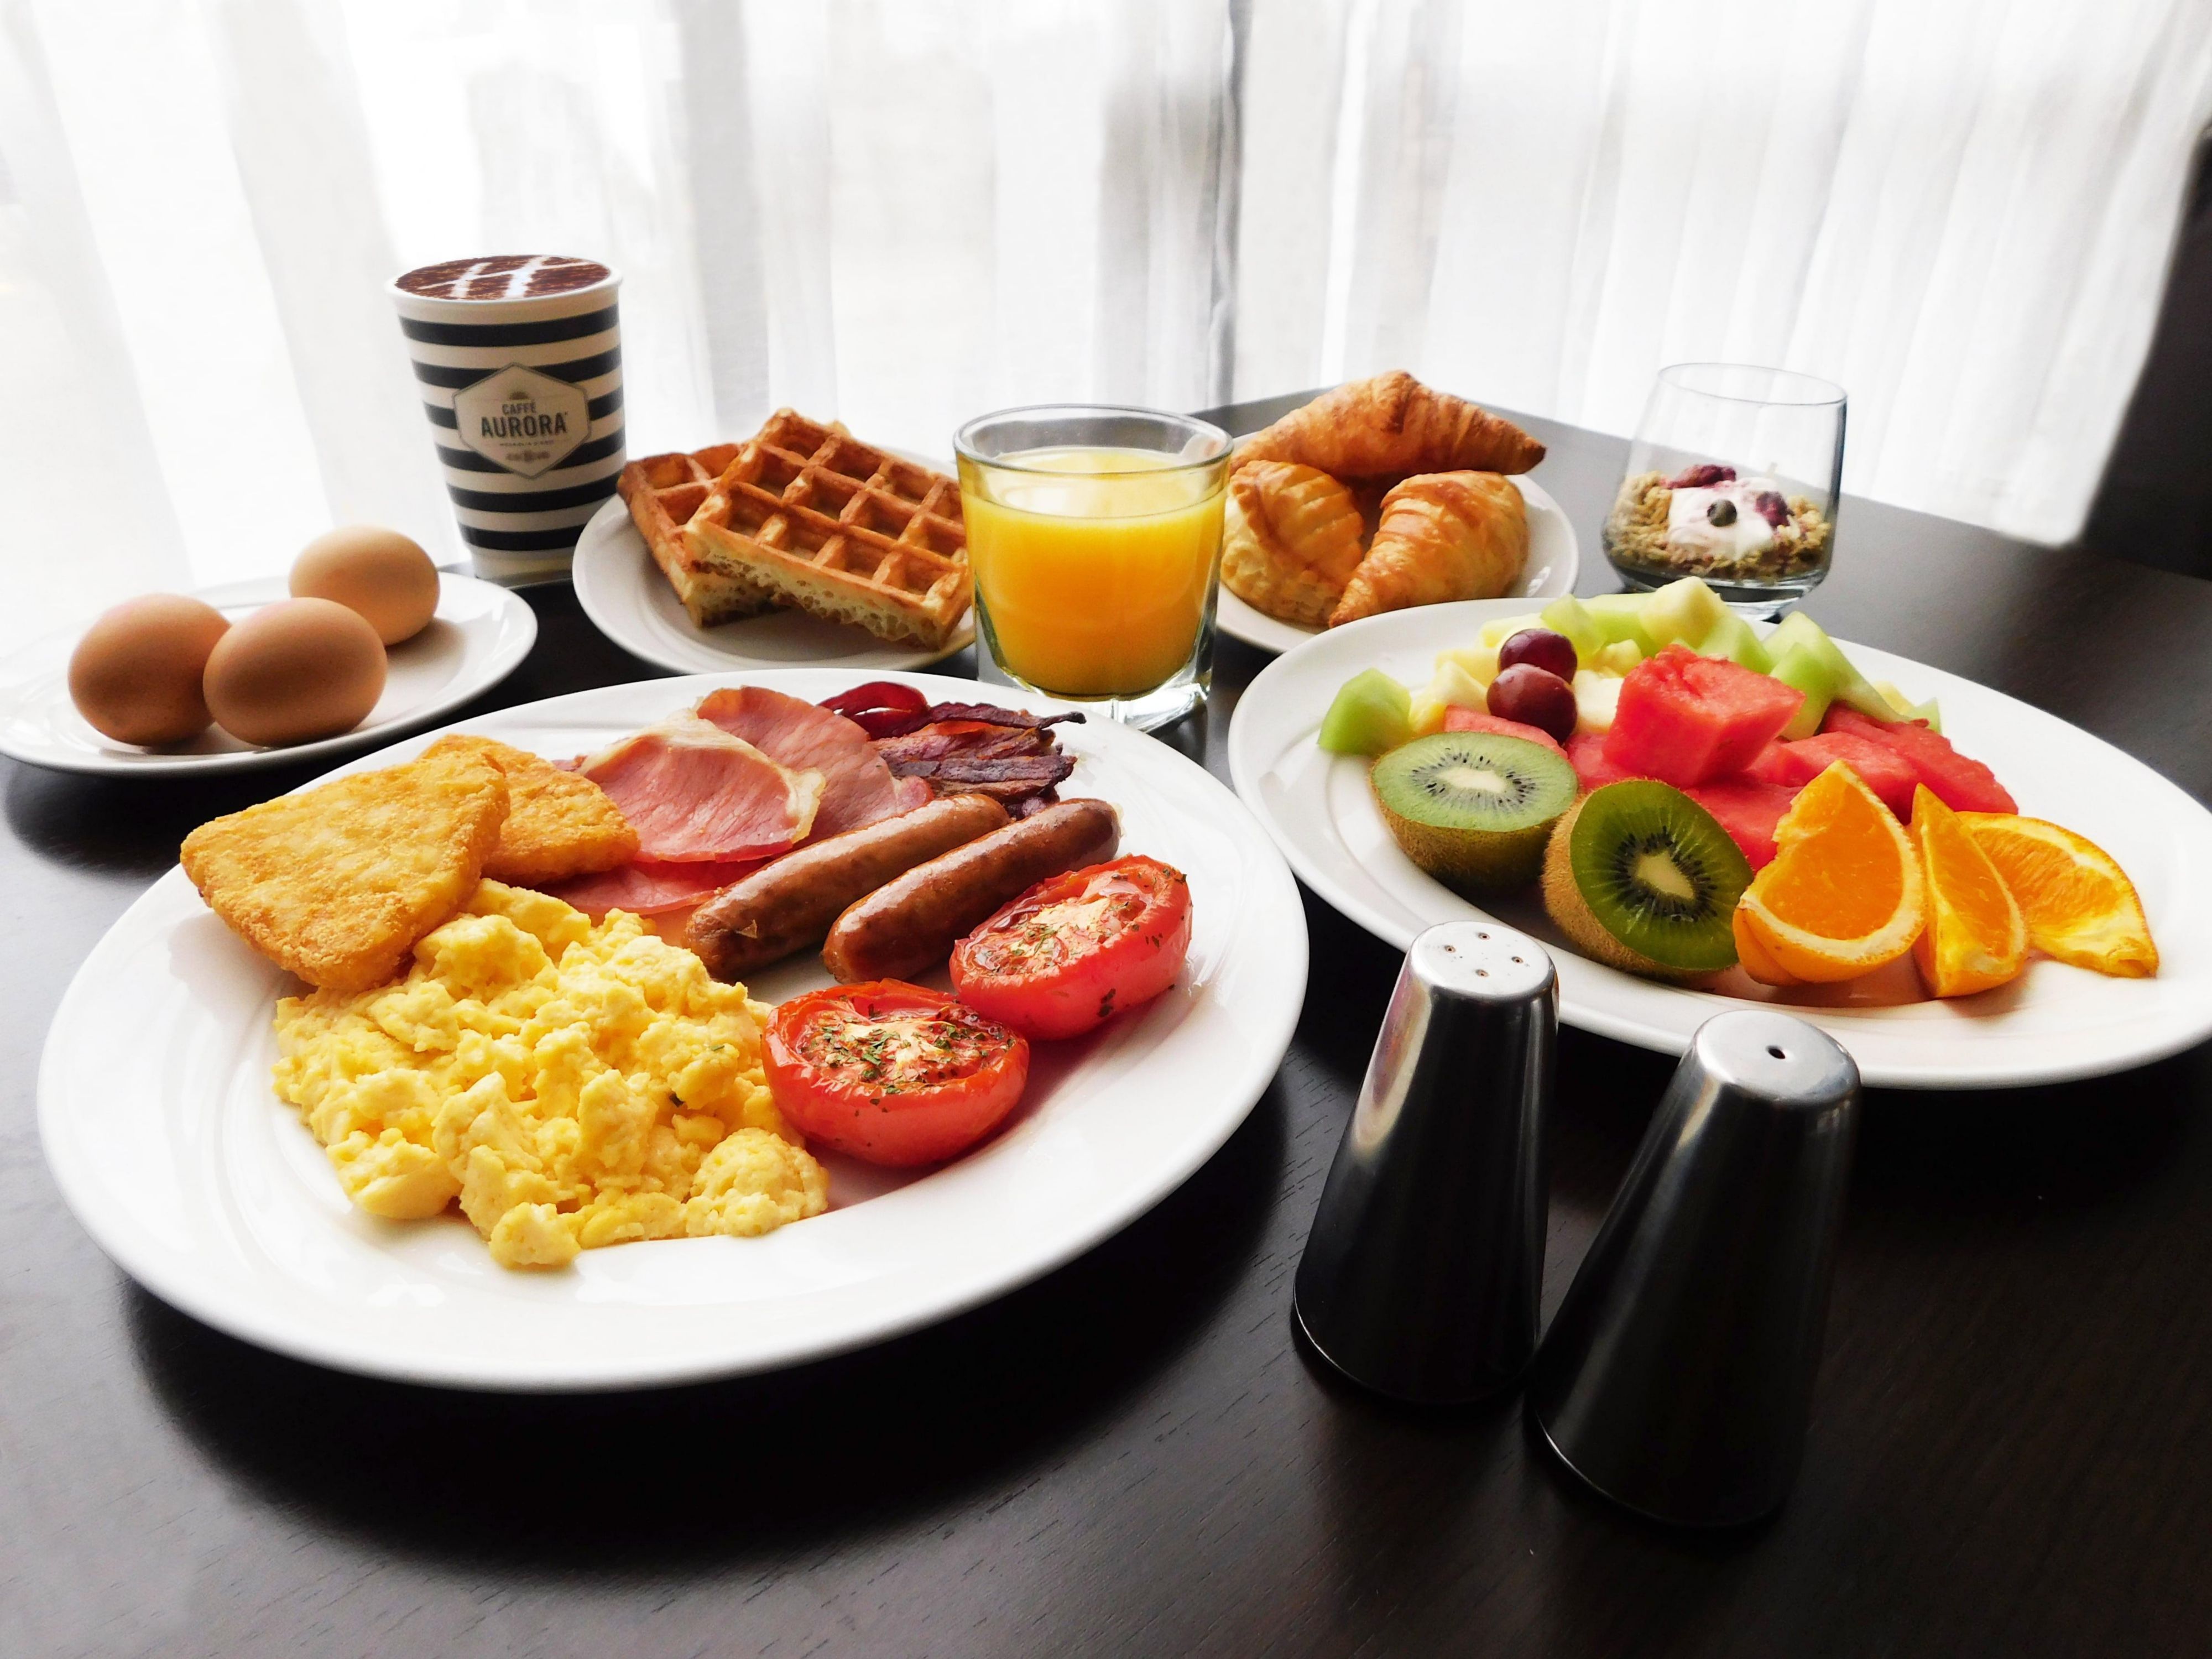 A little bit of this, a little bit of that... Enjoy breakfast your way with Holiday Inn Parramatta's buffet breakfast! Kids 12 and under eat free when dining with a paying adult staying in the hotel, to help you save on the basics.